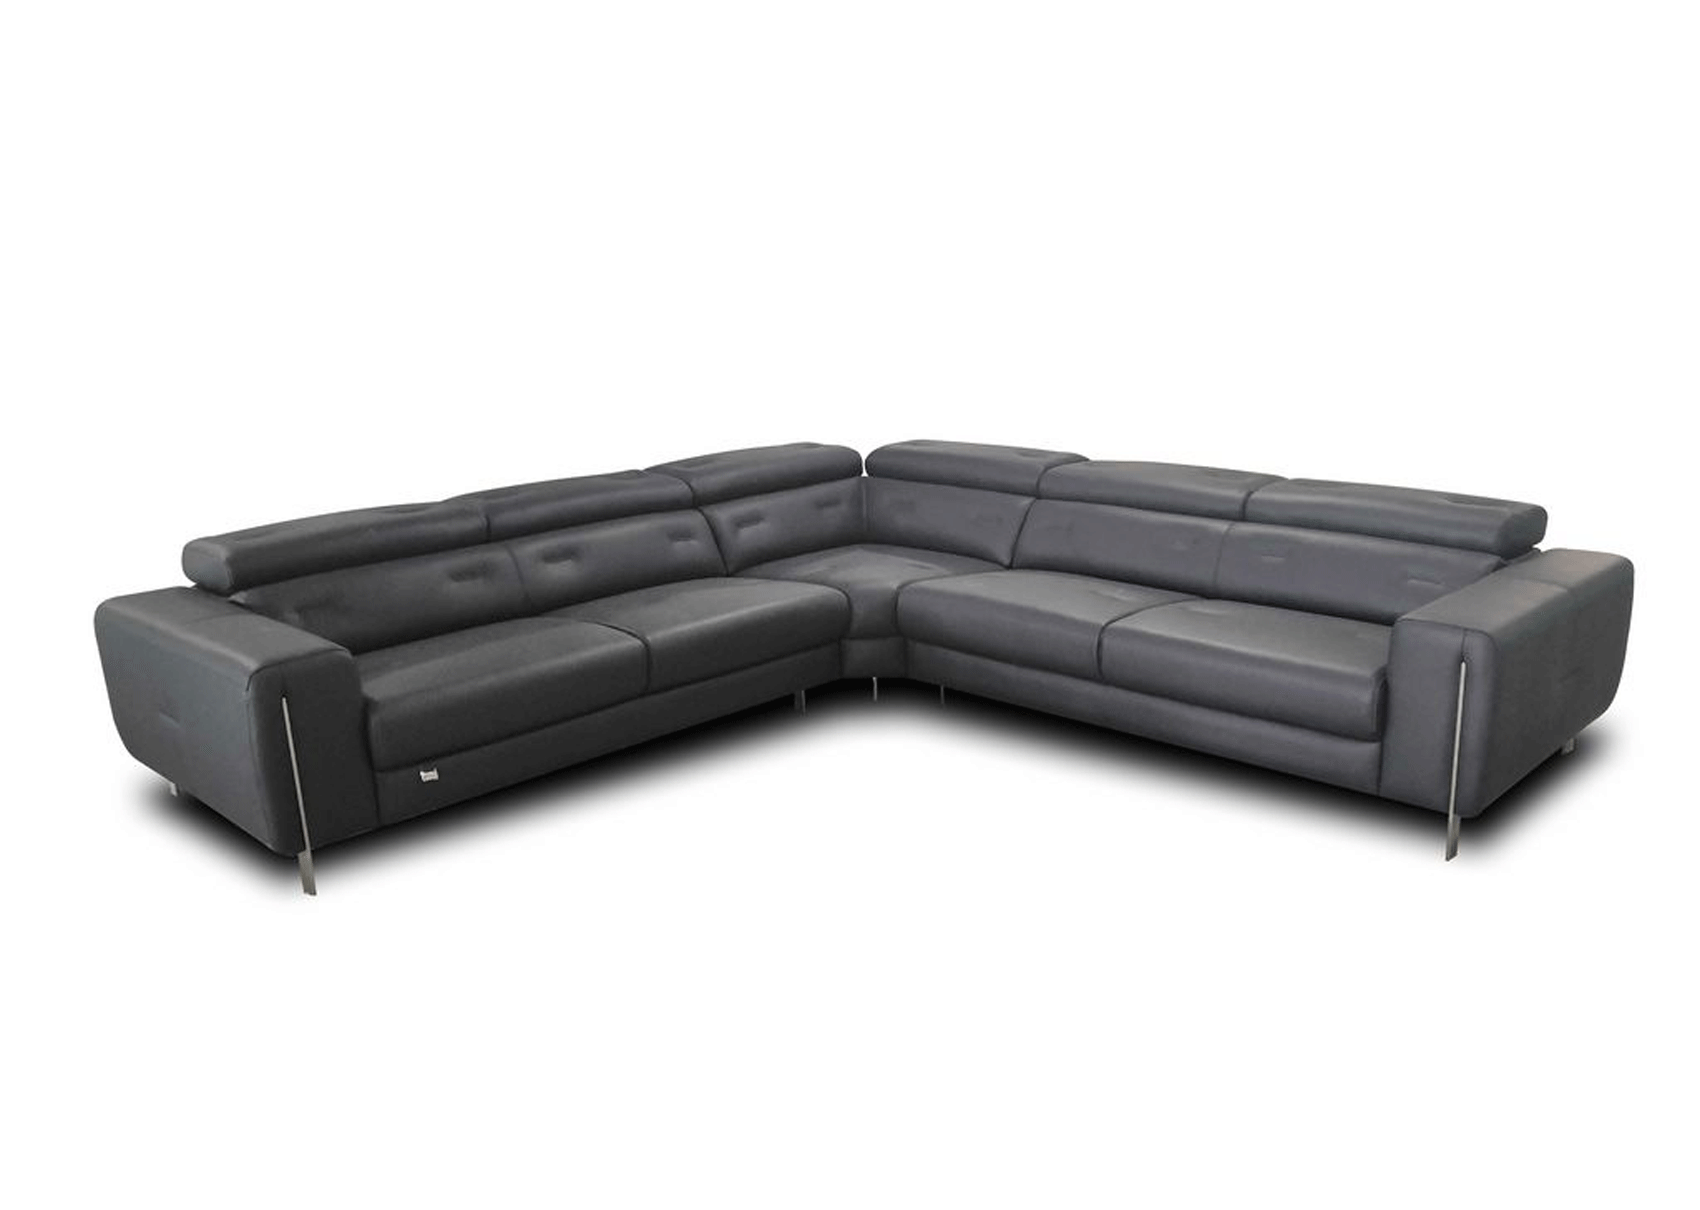 Living Room Furniture Reclining and Sliding Seats Sets 795 Sectional